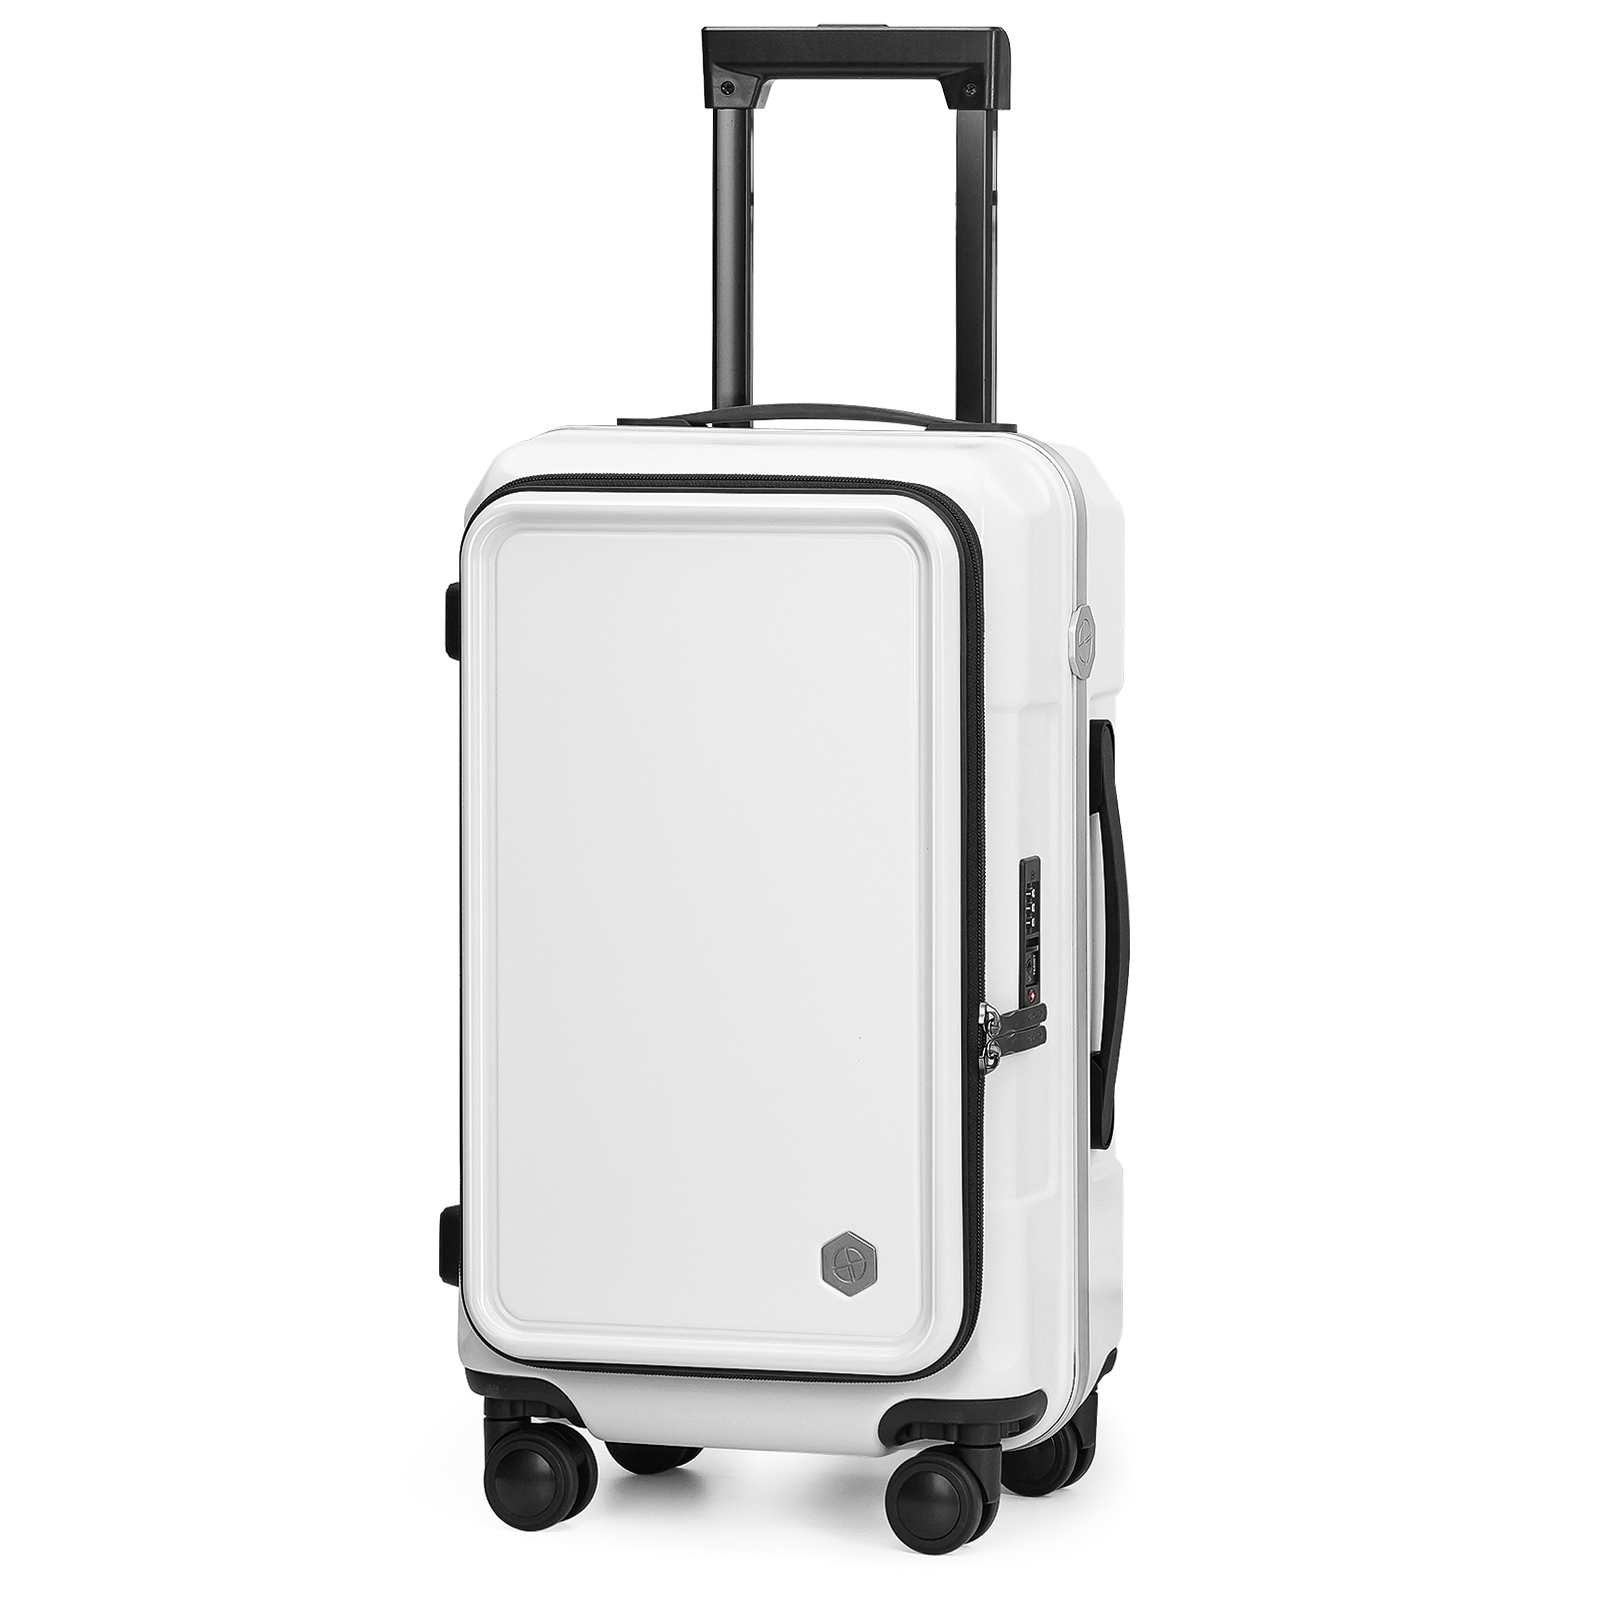 Coolife Luggage Carry On Spinner Suitcasewith Pocket Compartment Weekend Bag Hardside Trunk Aluminum Type